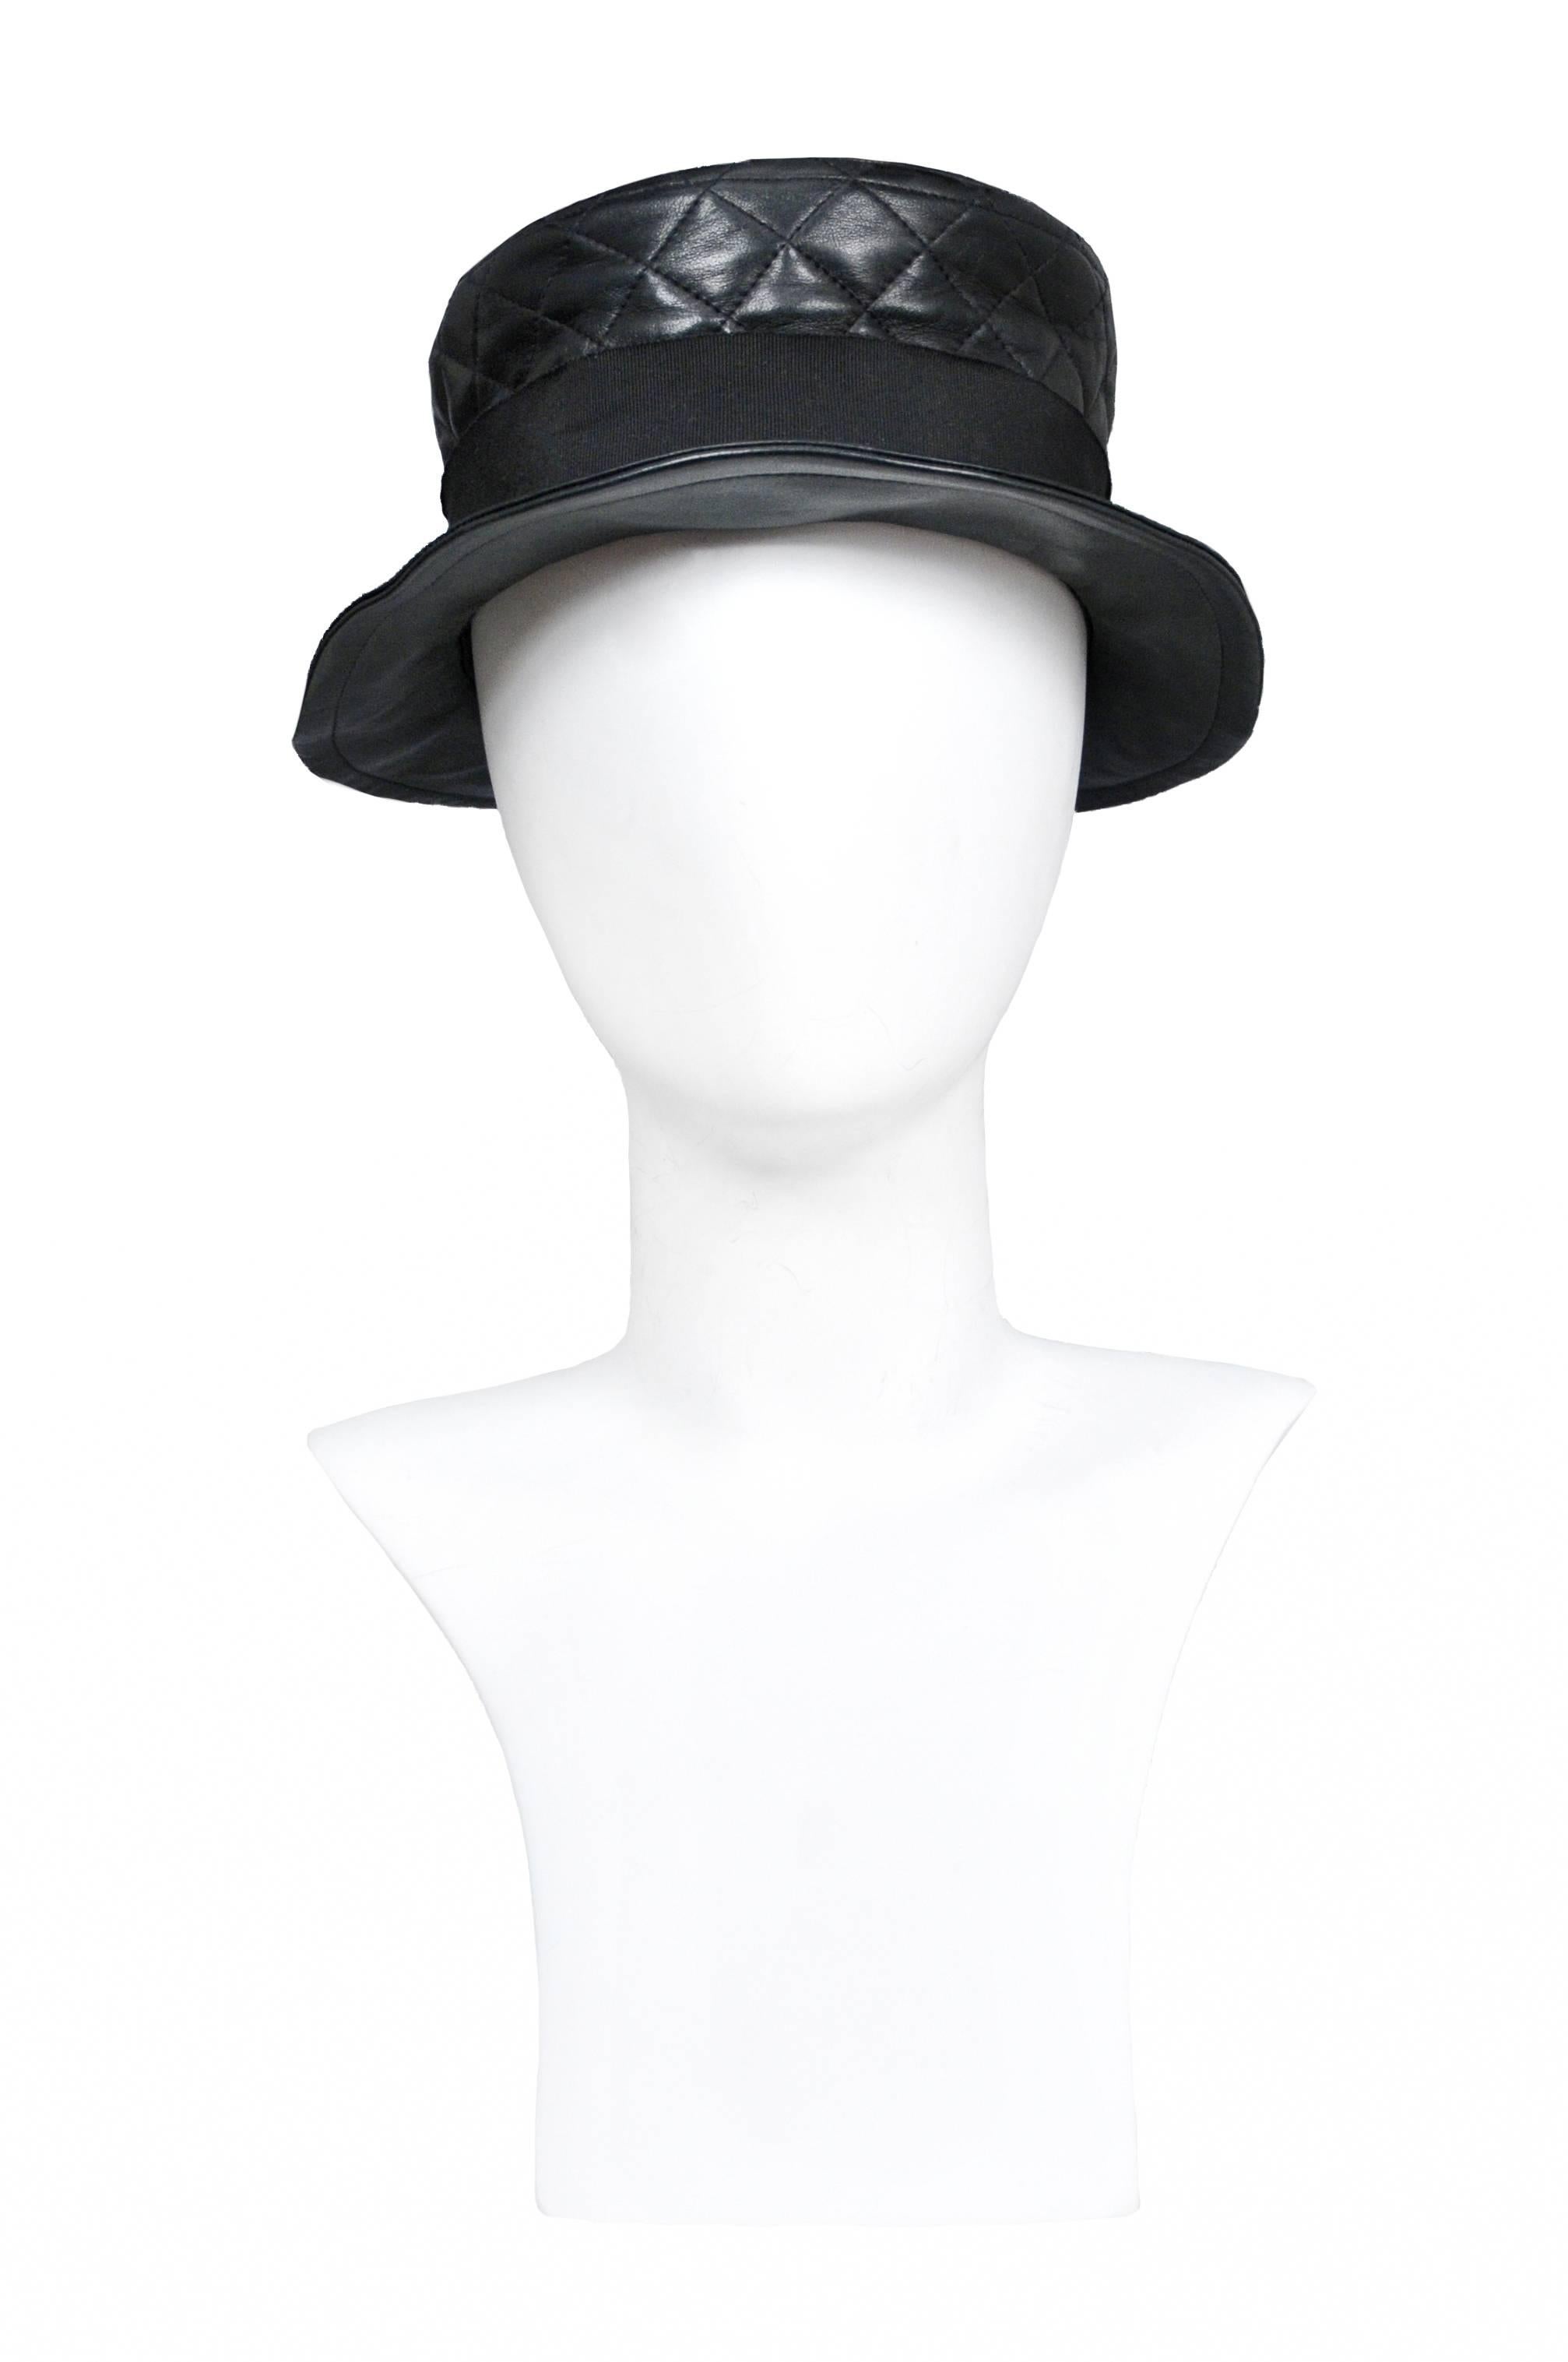 Vintage Chanel black quilted leather hat featuring a brim that slightly turns up and a black grosgrain ribbon surrounding the crown. Runway piece from the 1993 Autumn / Winter Collection.